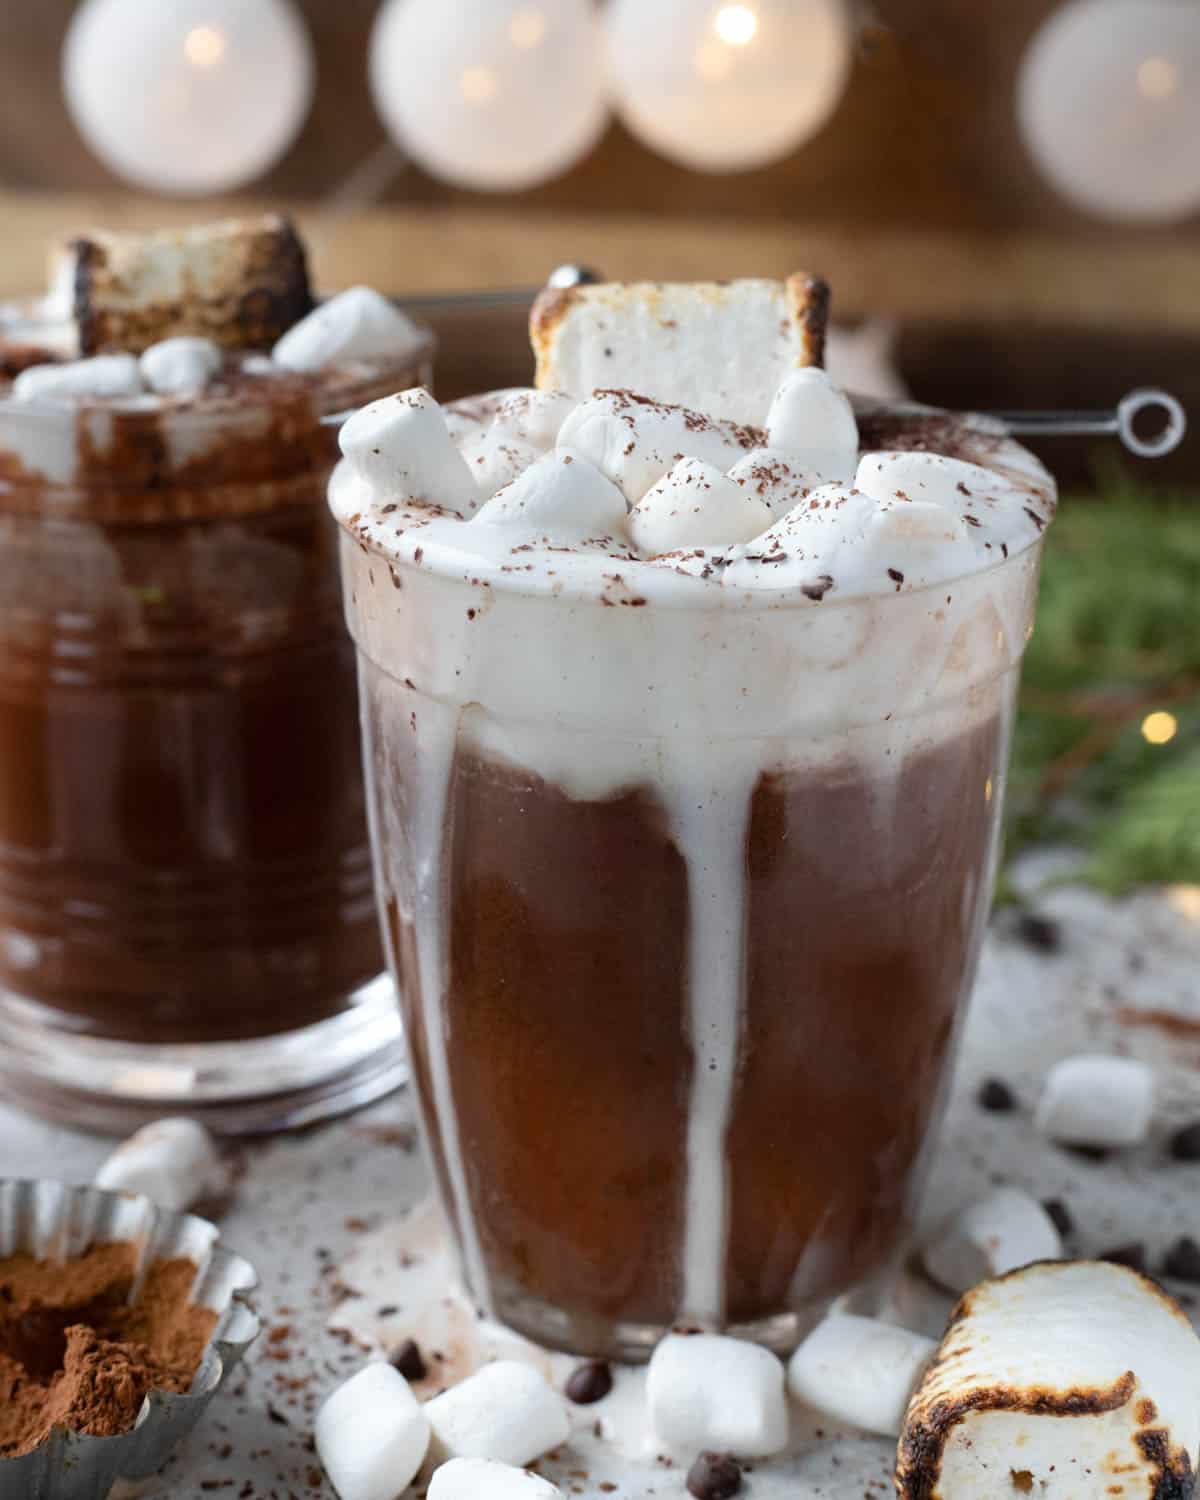 A festive setting featuring a tall glass of hot chocolate with oat milk, crowned with a swirl of whipped cream and marshmallows. The background is softly lit, suggesting a cozy ambiance.